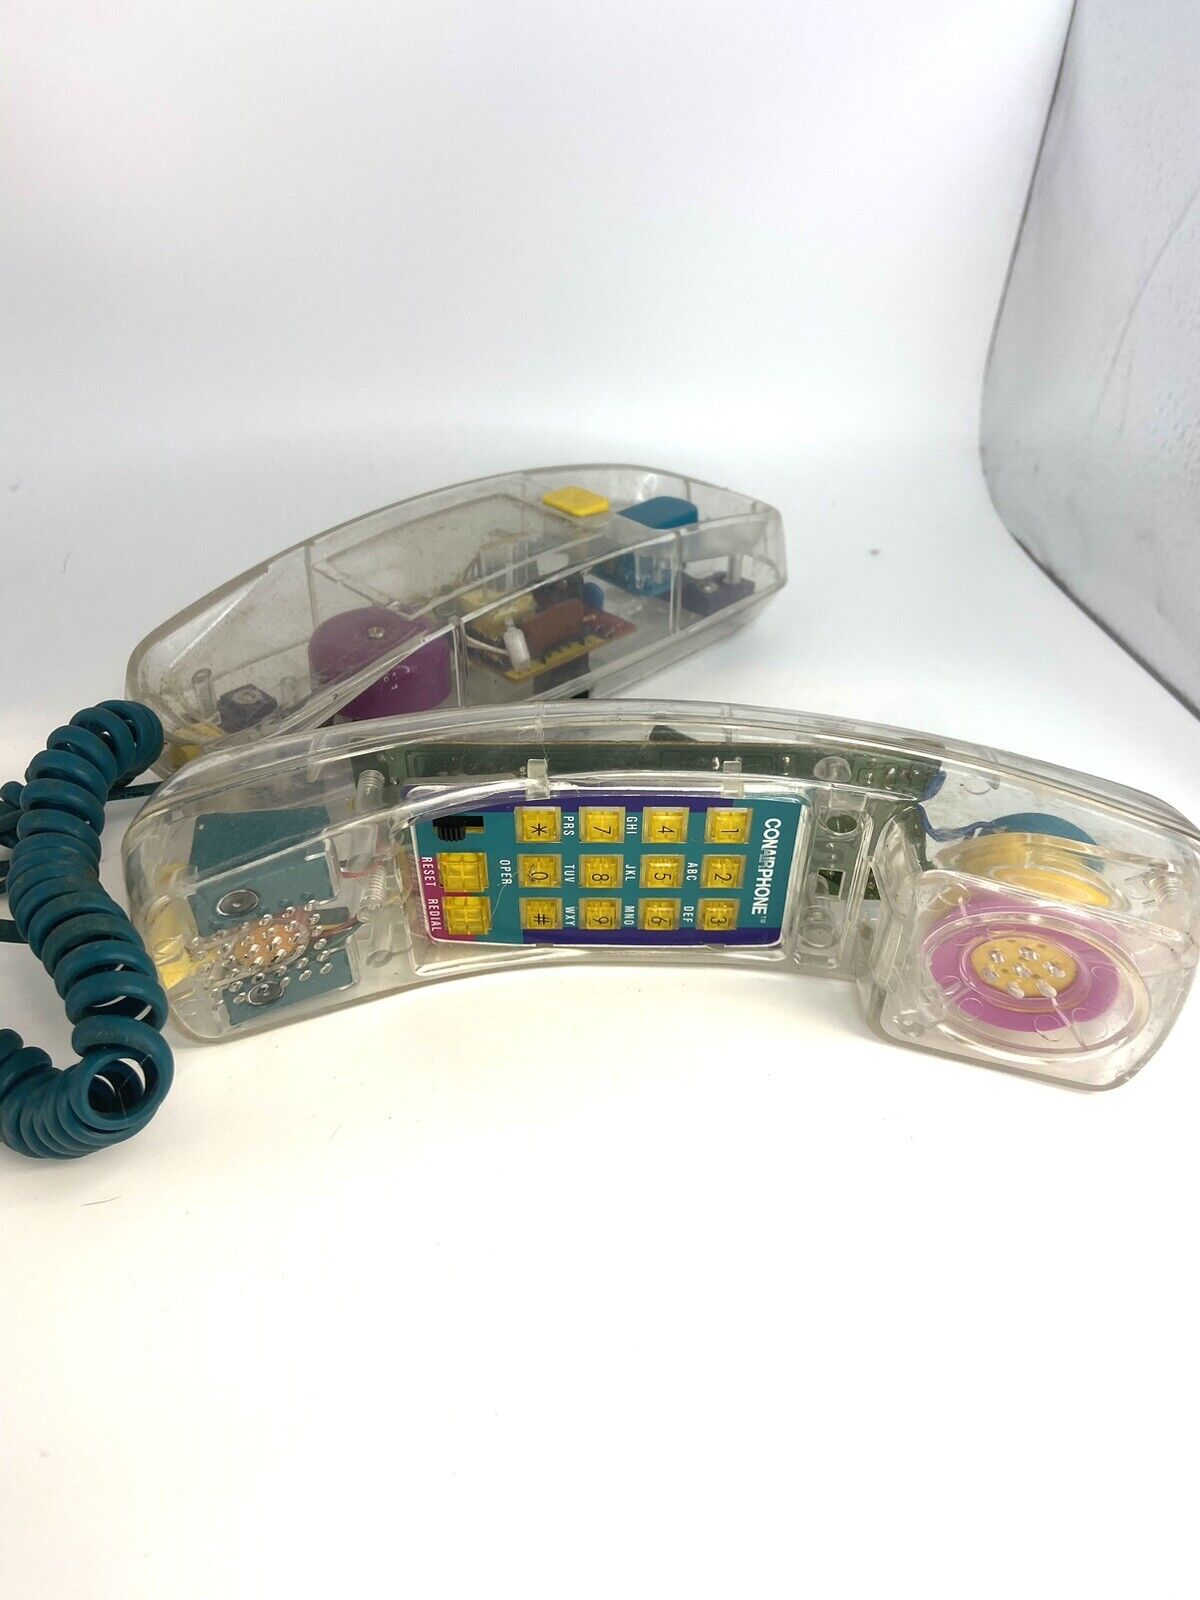 Retro Vintage 1980-90\'s Conair Clear Model SW205 Push Button Telephone UNTESTED